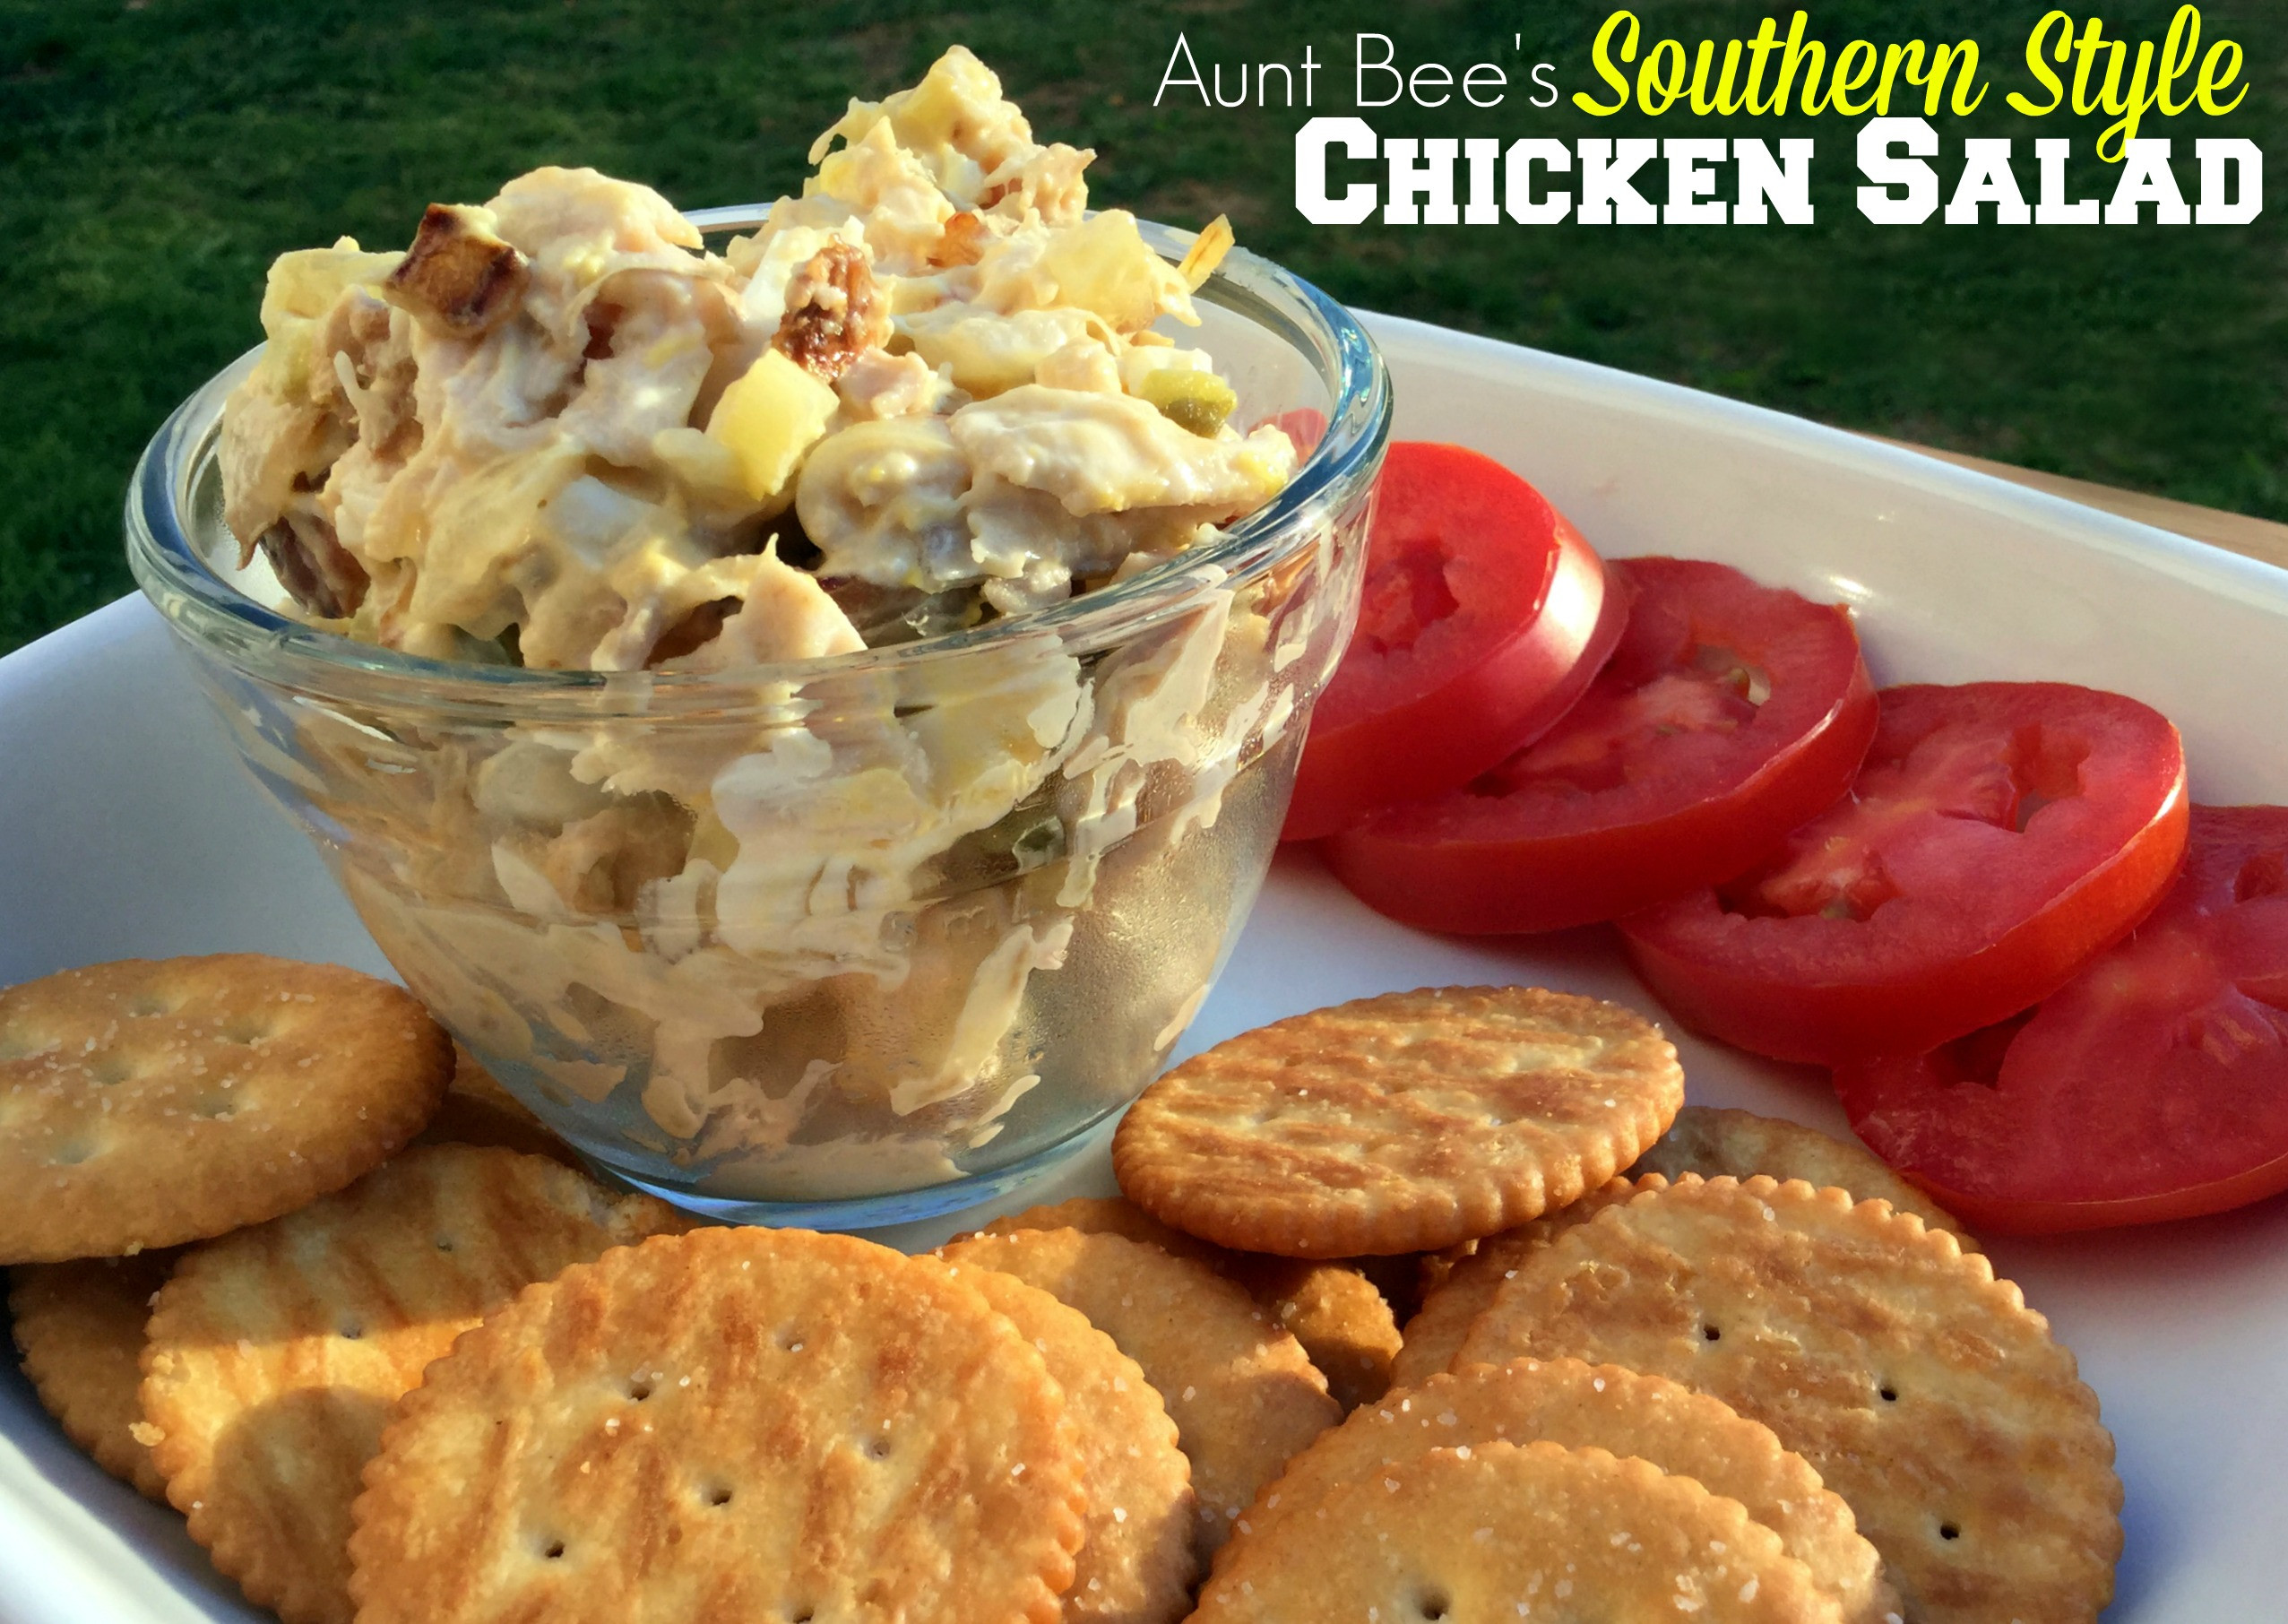 Old Fashioned Chicken Salad Awesome Southern Style Chicken Salad Aunt Bee S Recipes Of Old Fashioned Chicken Salad 